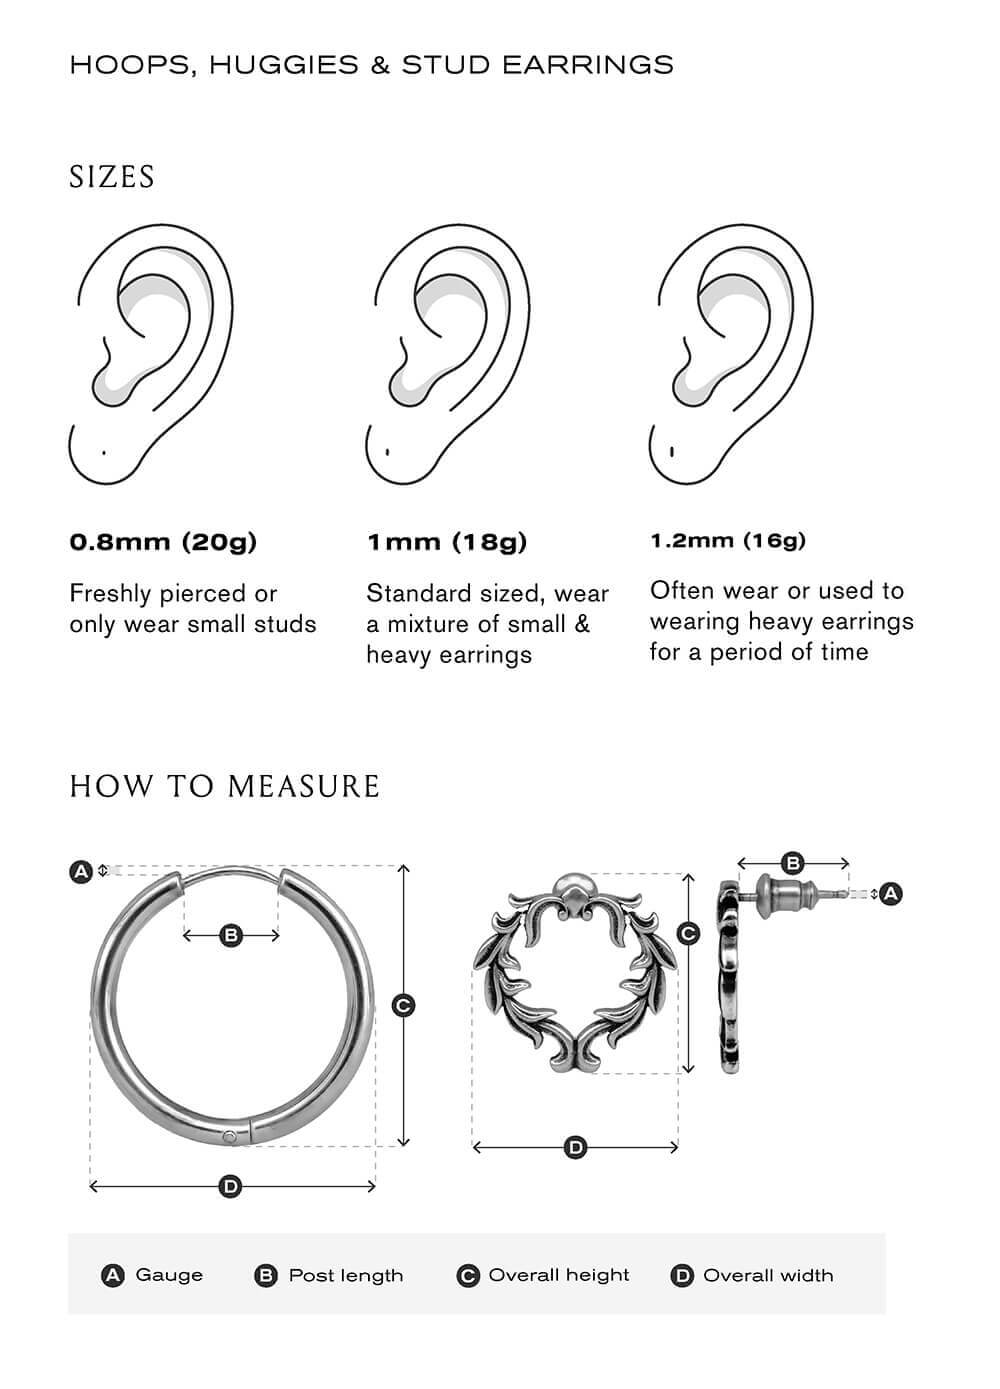 Jewelry Sizing Guide | Body Jewelry & Gauged Ear Jewelry – Ask and Embla